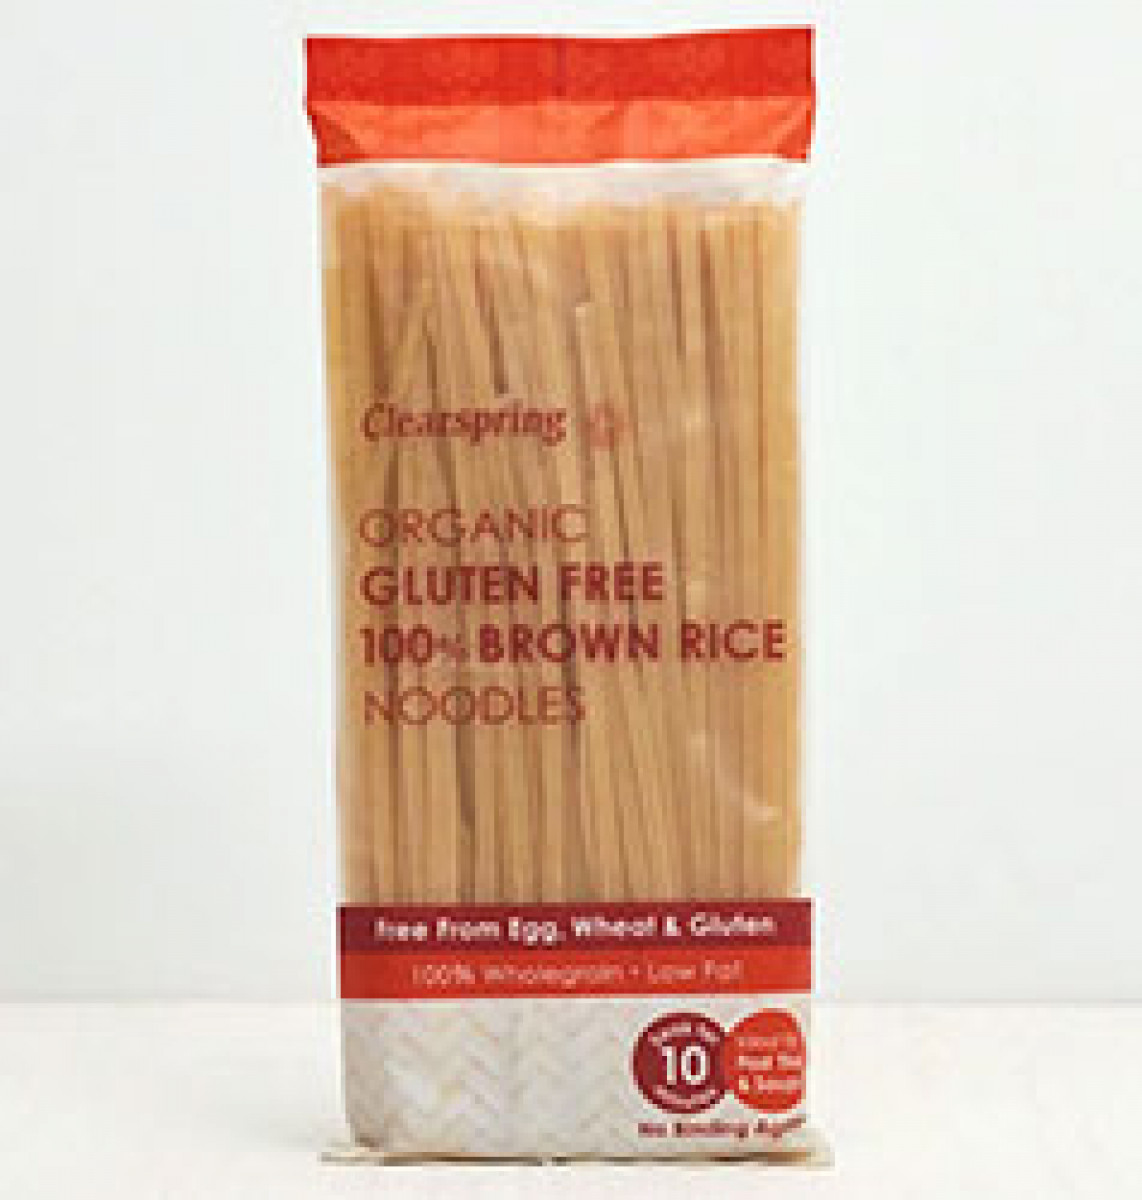 Product picture for Gluten Free Noodles 100% Brown Rice